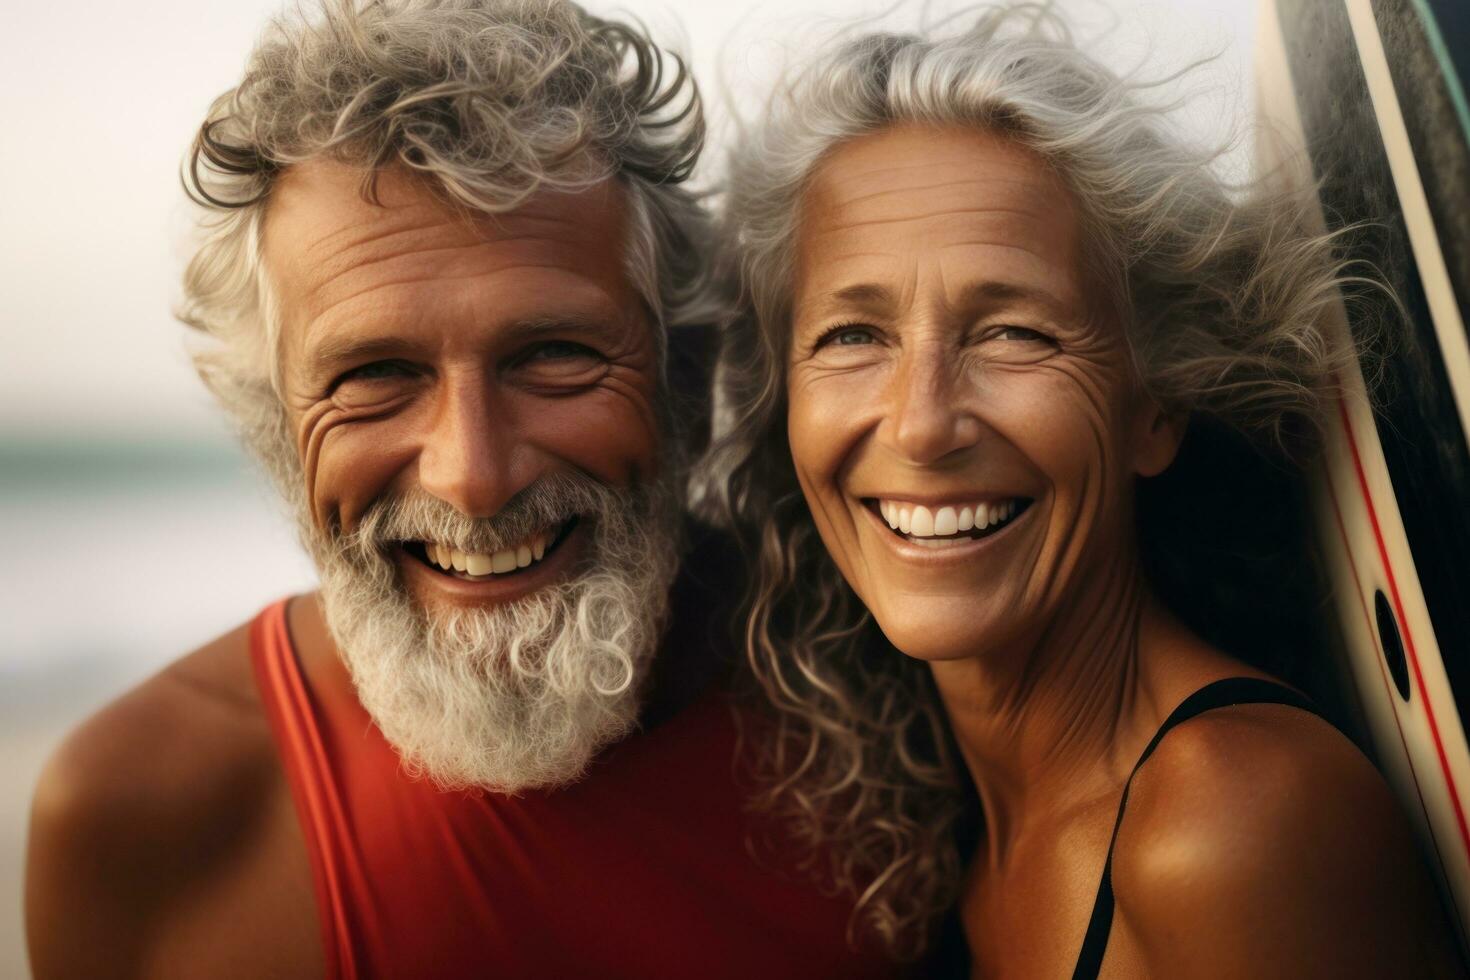 an elderly couple standing together holding a surfboard photo